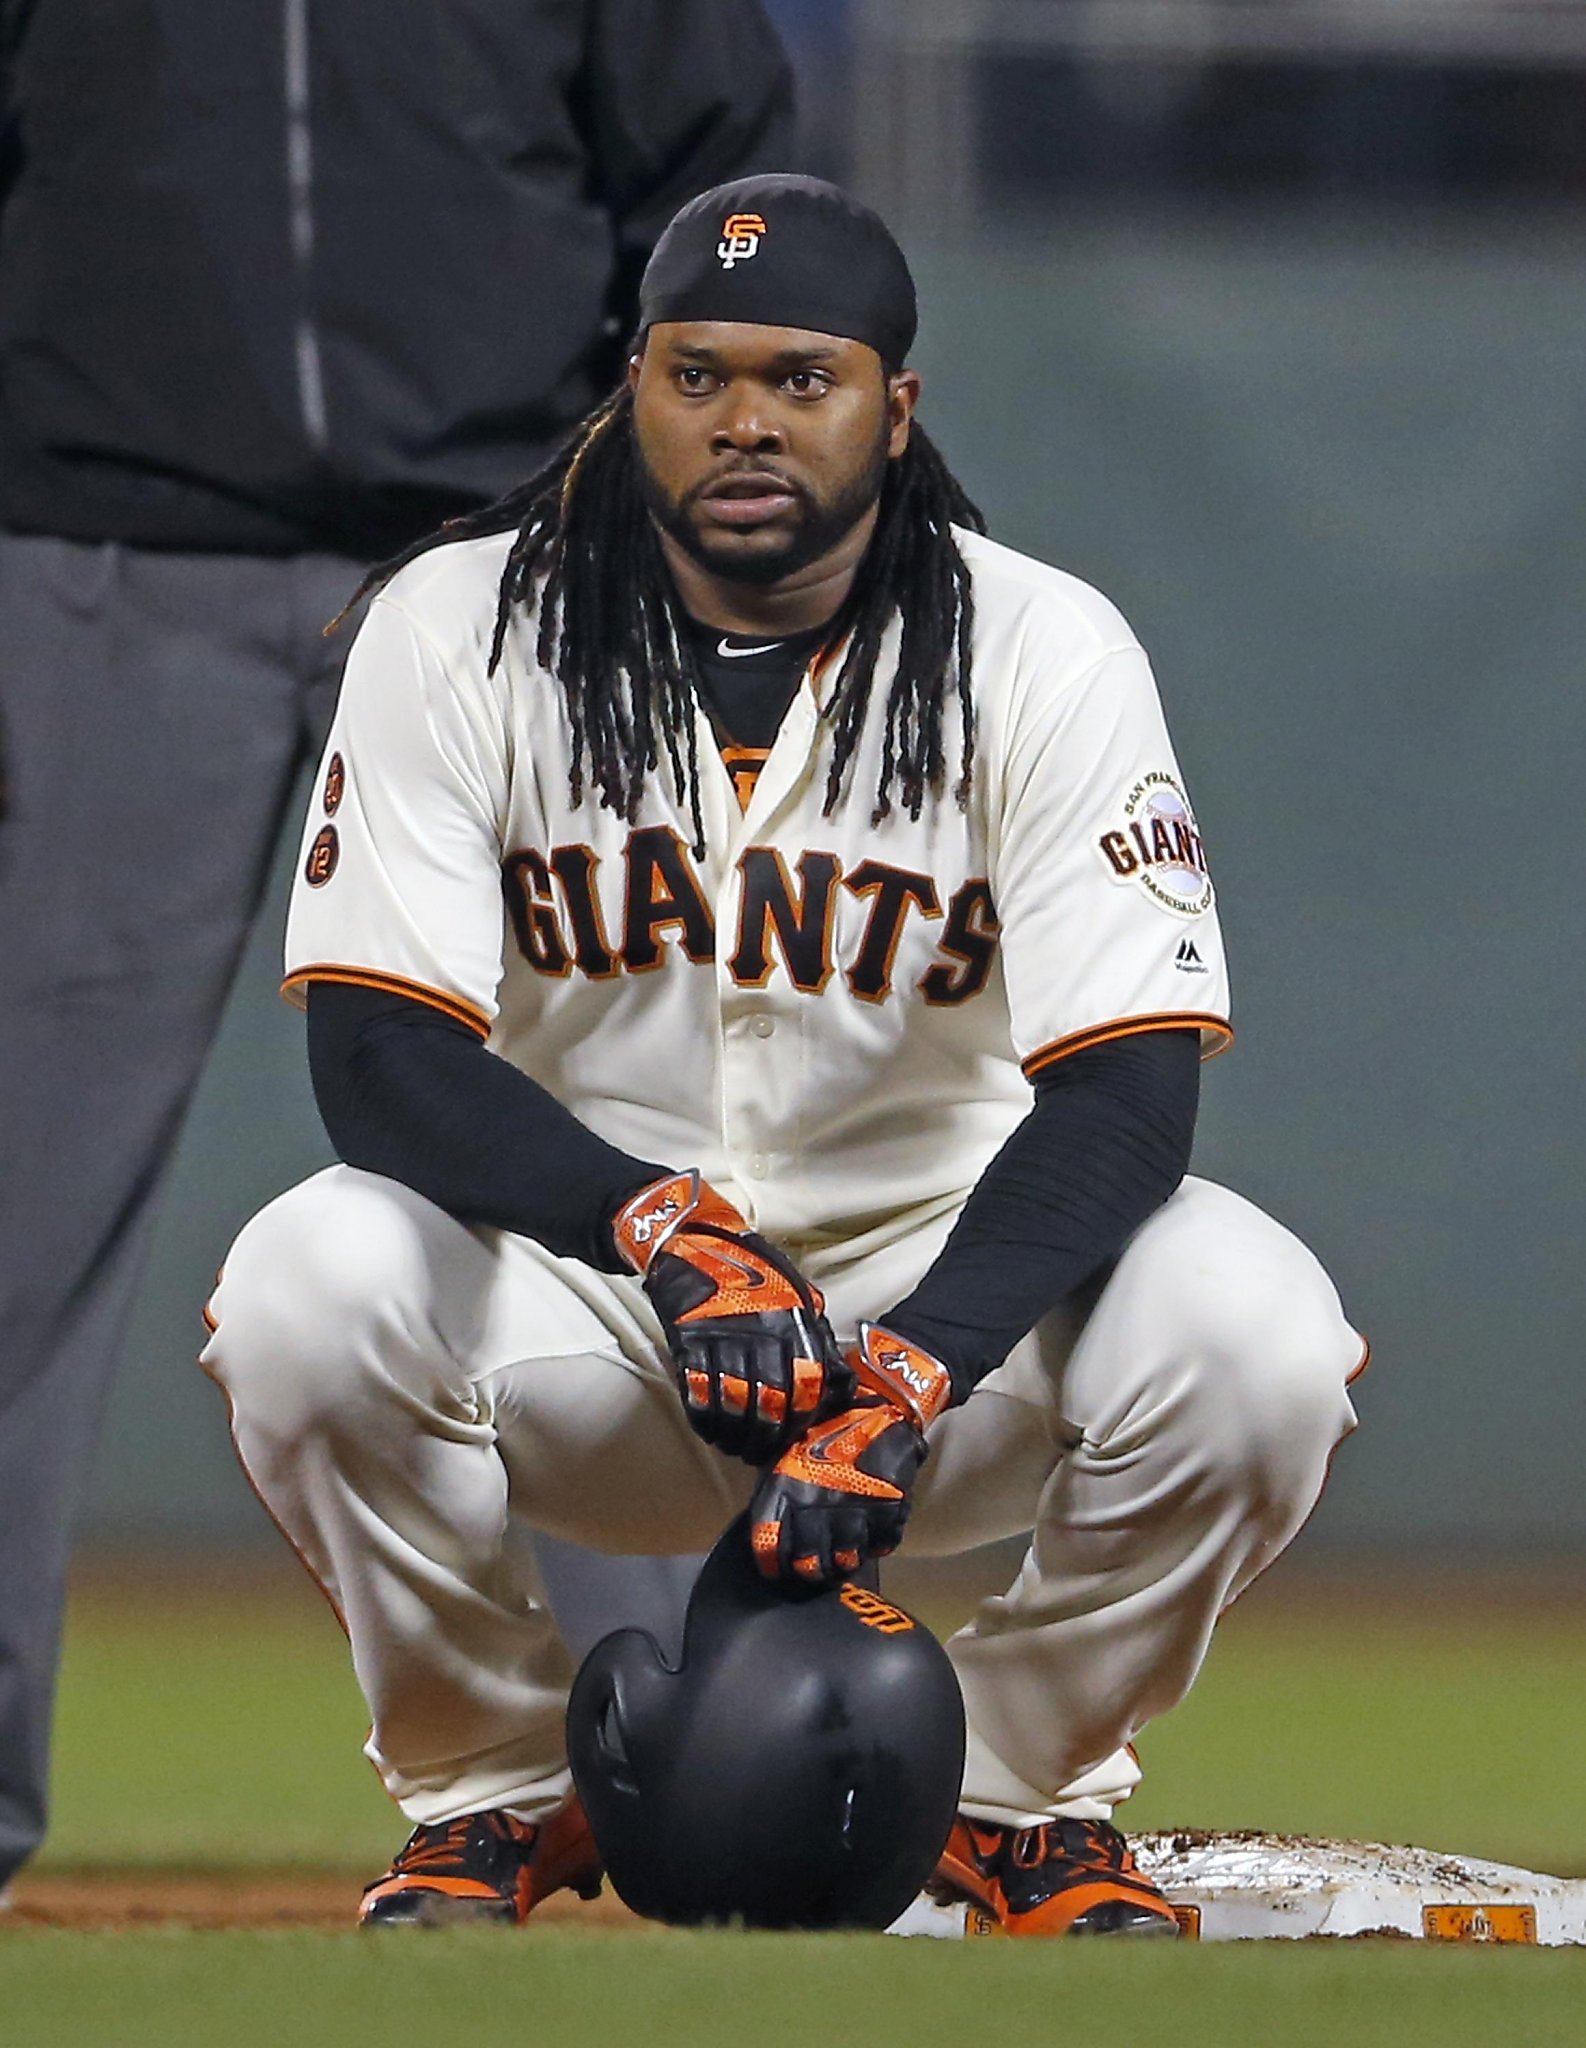 Giants hope Johnny Cueto can arrive soon, be ready for Opening Day